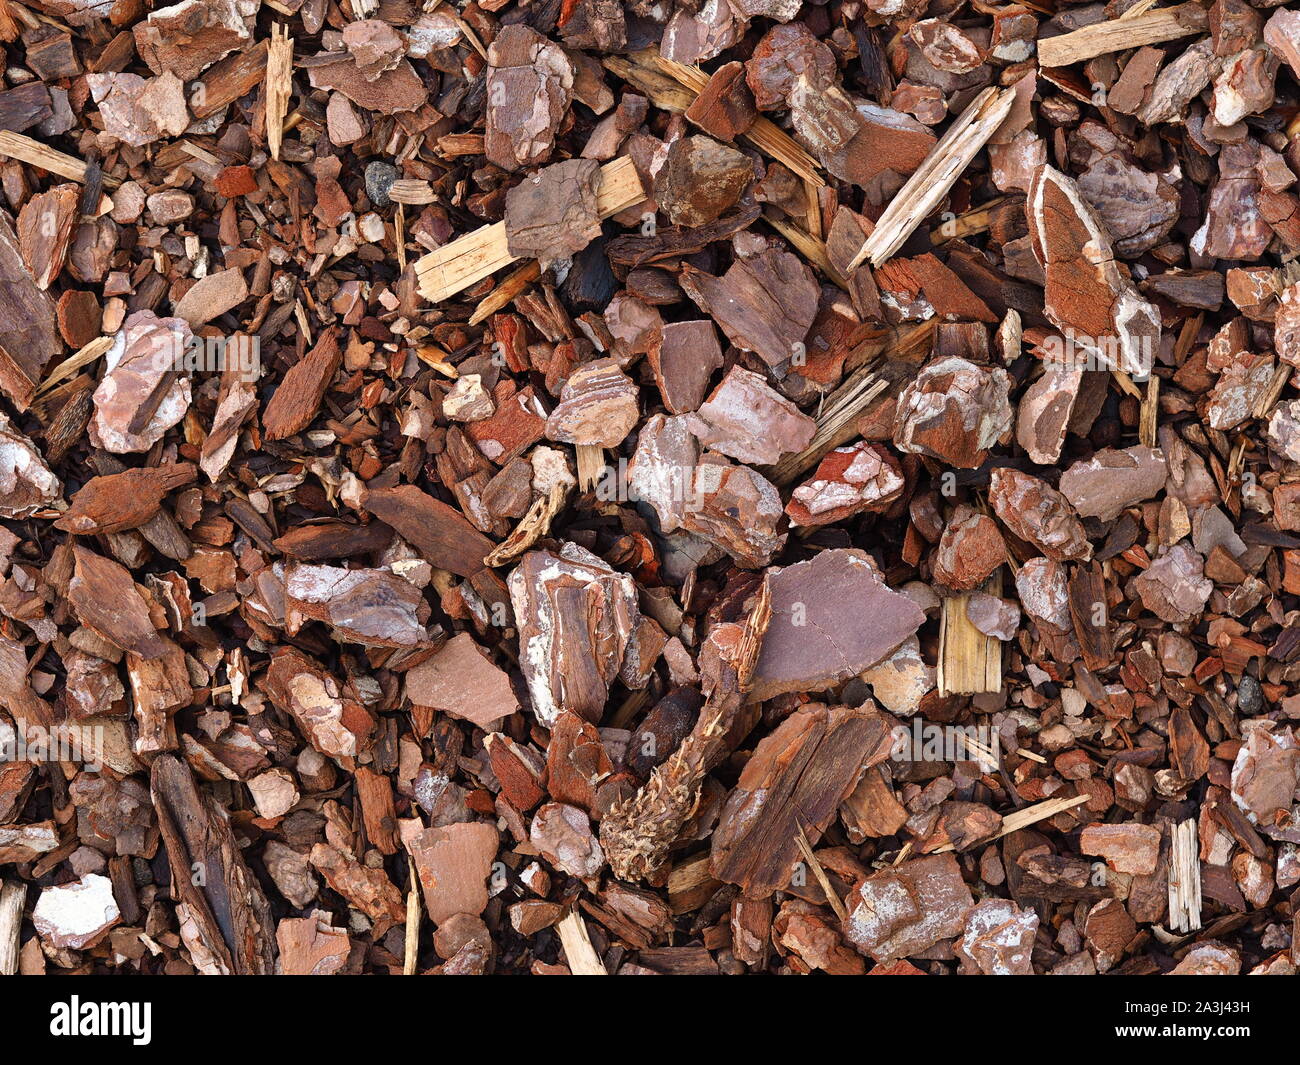 Wood chips lying on the ground, would make a great background Stock Photo